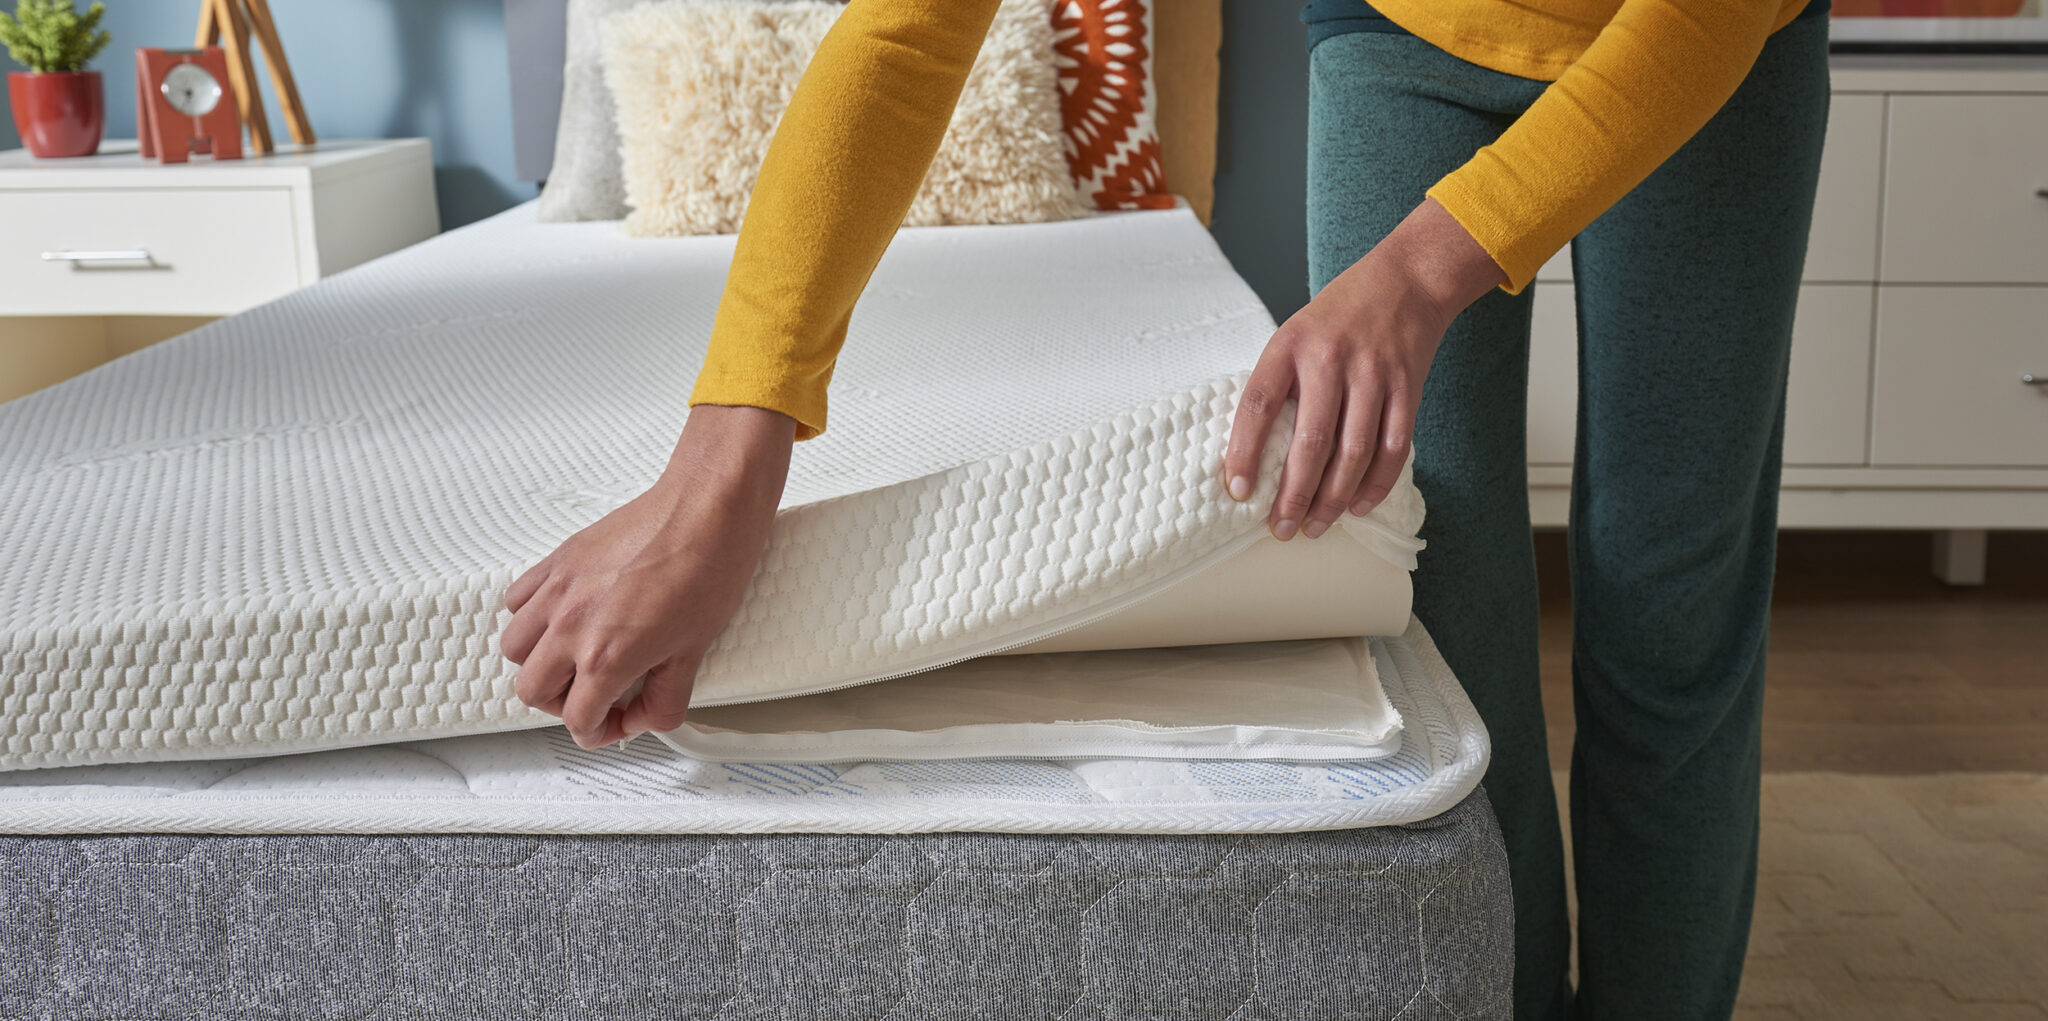 can you sell a used mattress topper online